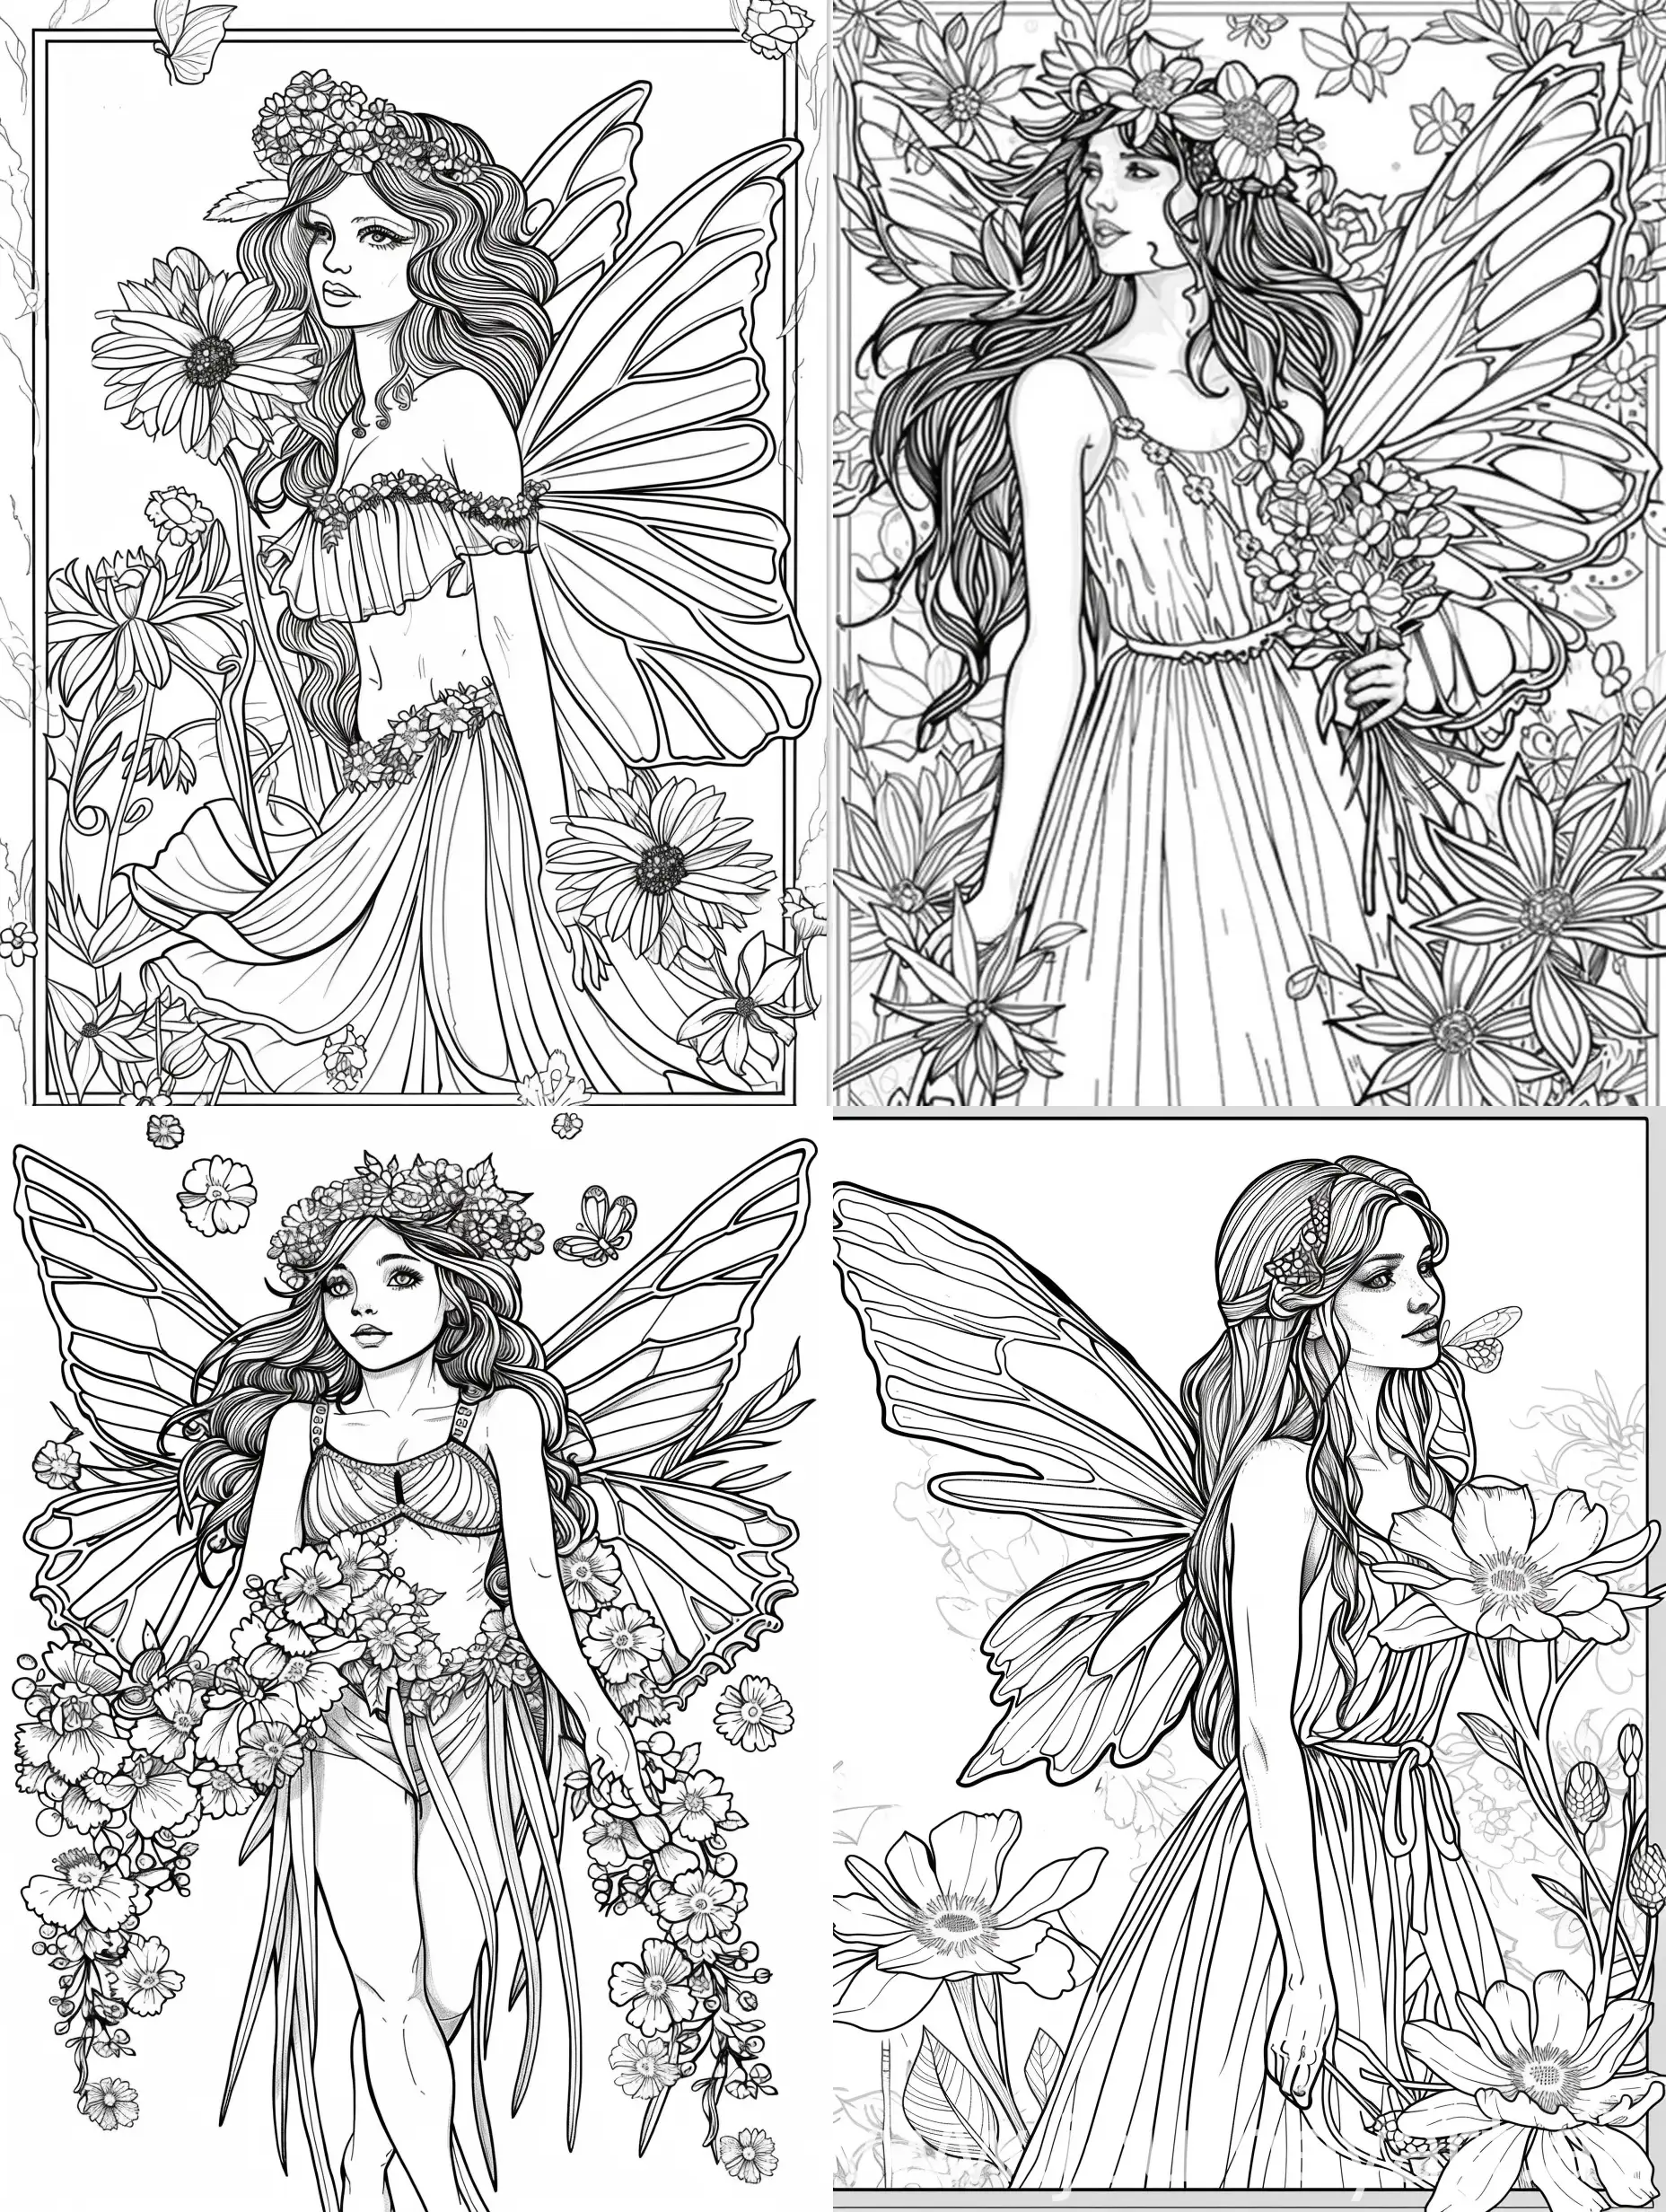 Fairy-Coloring-Page-with-Floral-Design-for-Relaxation-and-Creativity